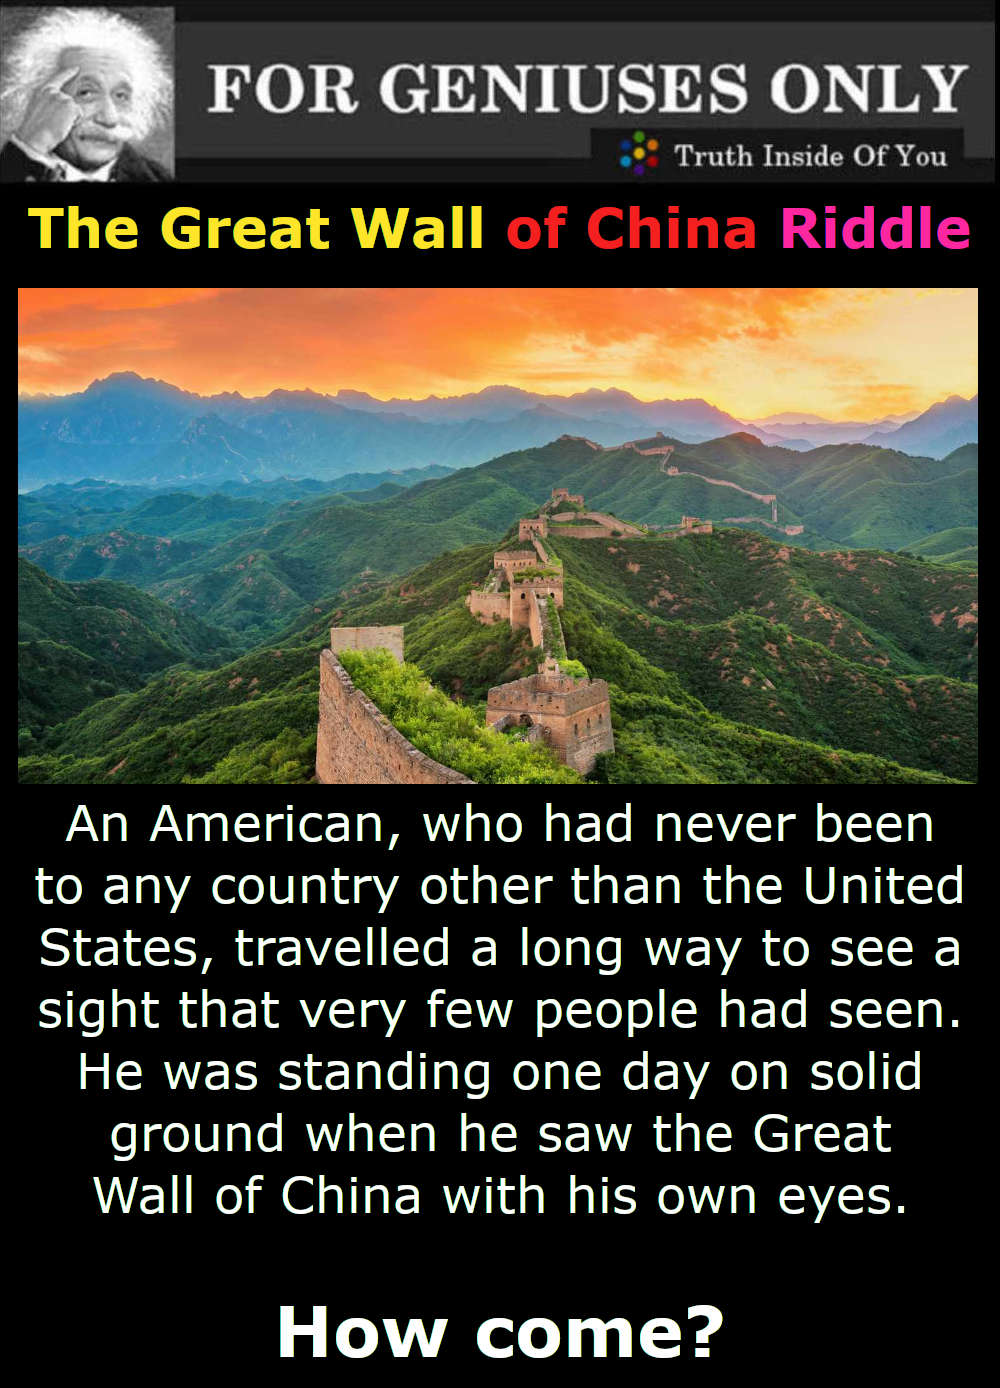 The Great Wall of China Riddle